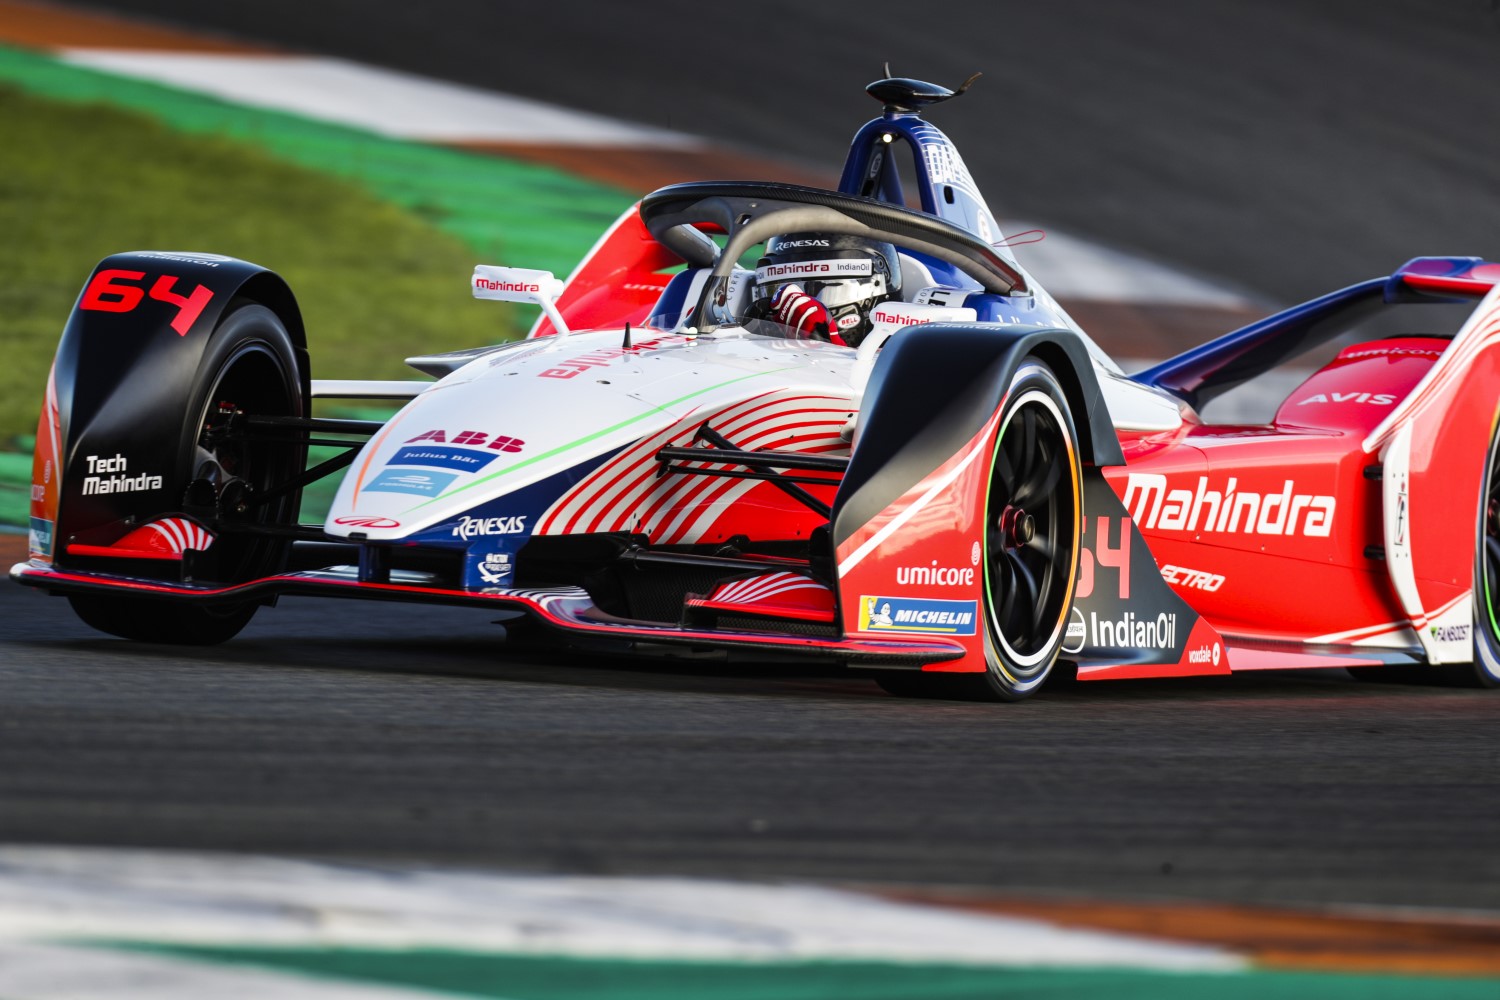 Formula E will be the future, that is where, soon, 100% of manufacturer R&D money will be placed